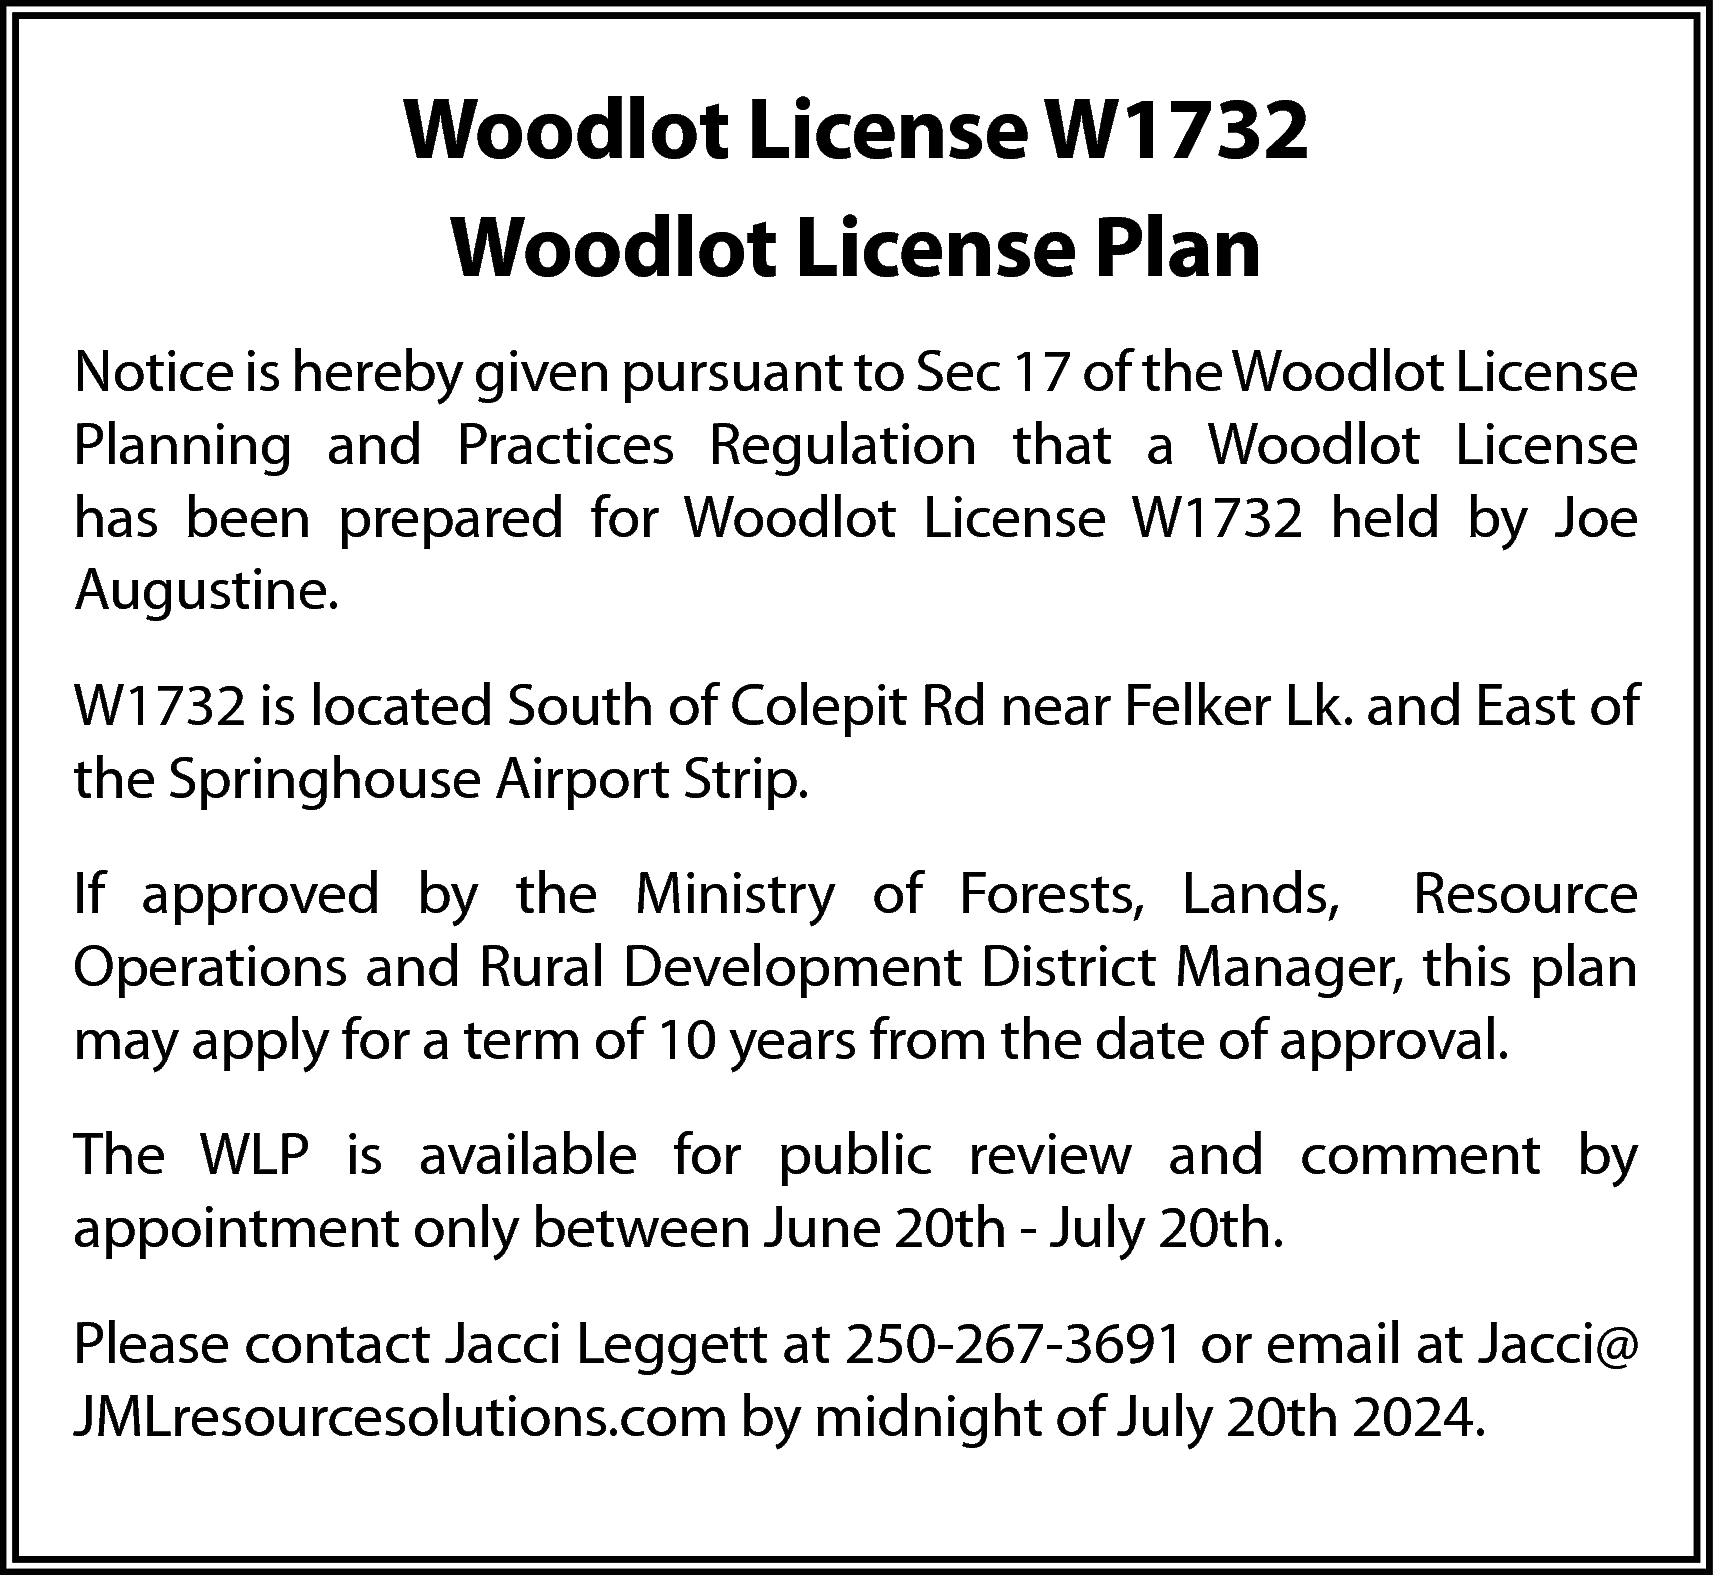 Woodlot License W1732 <br>Woodlot License  Woodlot License W1732  Woodlot License Plan  Notice is hereby given pursuant to Sec 17 of the Woodlot License  Planning and Practices Regulation that a Woodlot License  has been prepared for Woodlot License W1732 held by Joe  Augustine.  W1732 is located South of Colepit Rd near Felker Lk. and East of  the Springhouse Airport Strip.  If approved by the Ministry of Forests, Lands, Resource  Operations and Rural Development District Manager, this plan  may apply for a term of 10 years from the date of approval.  The WLP is available for public review and comment by  appointment only between June 20th - July 20th.  Please contact Jacci Leggett at 250-267-3691 or email at Jacci@  JMLresourcesolutions.com by midnight of July 20th 2024.    